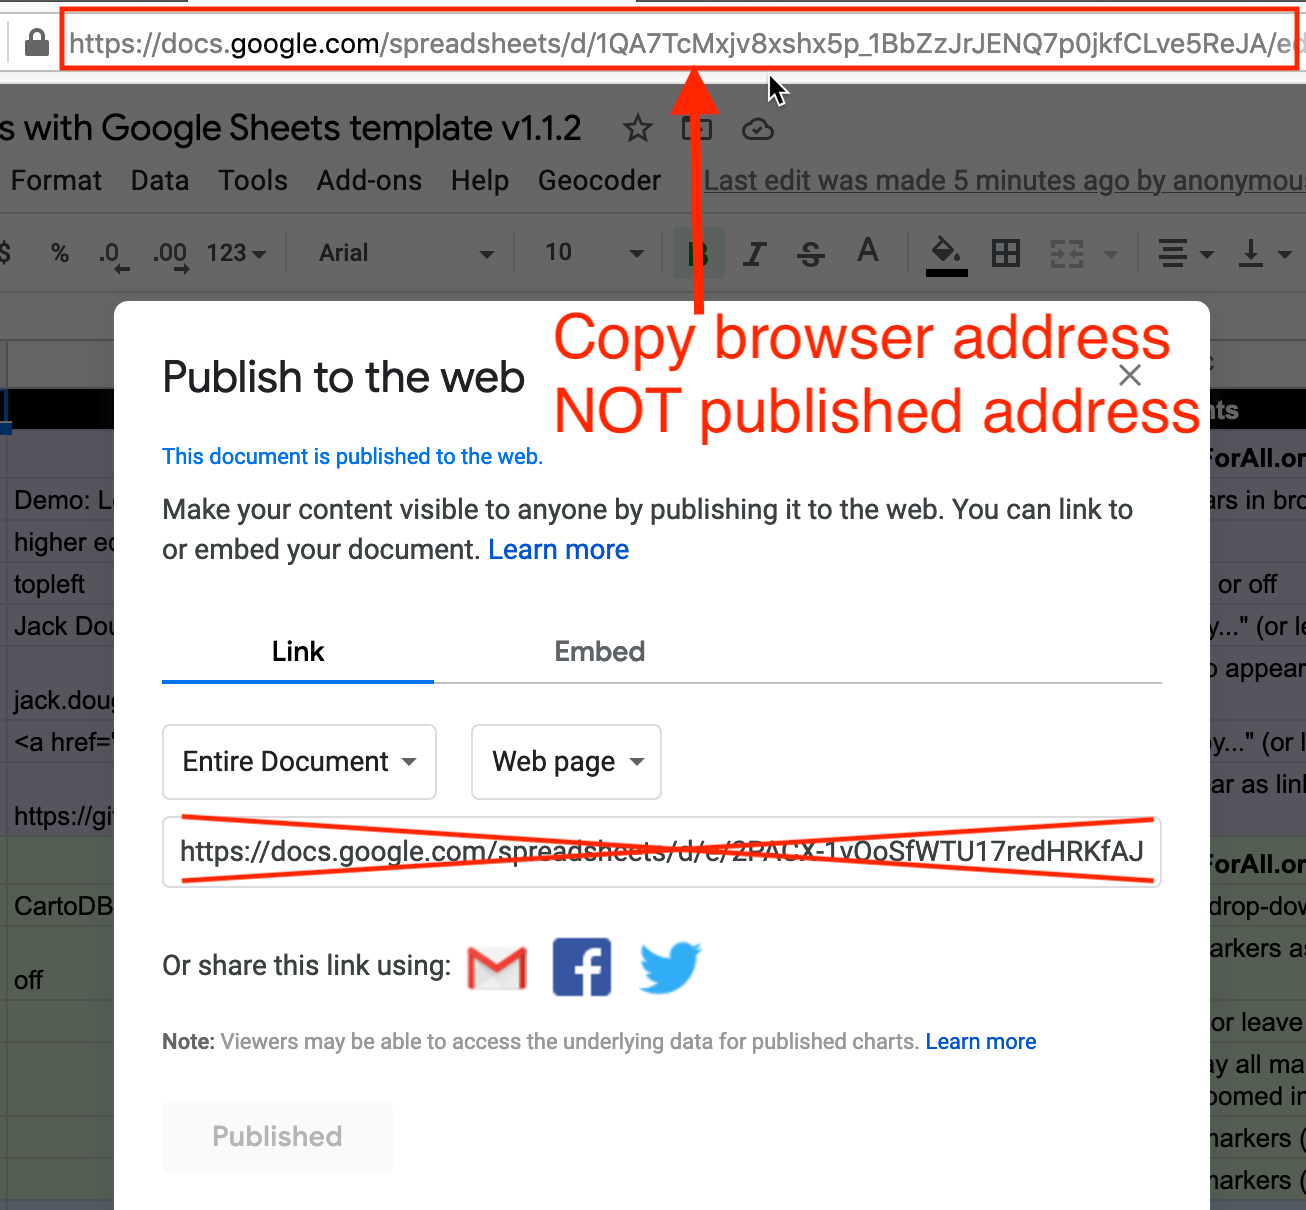 Copy the Google Sheet address at the top of the browser, NOT the Publish to the web address.